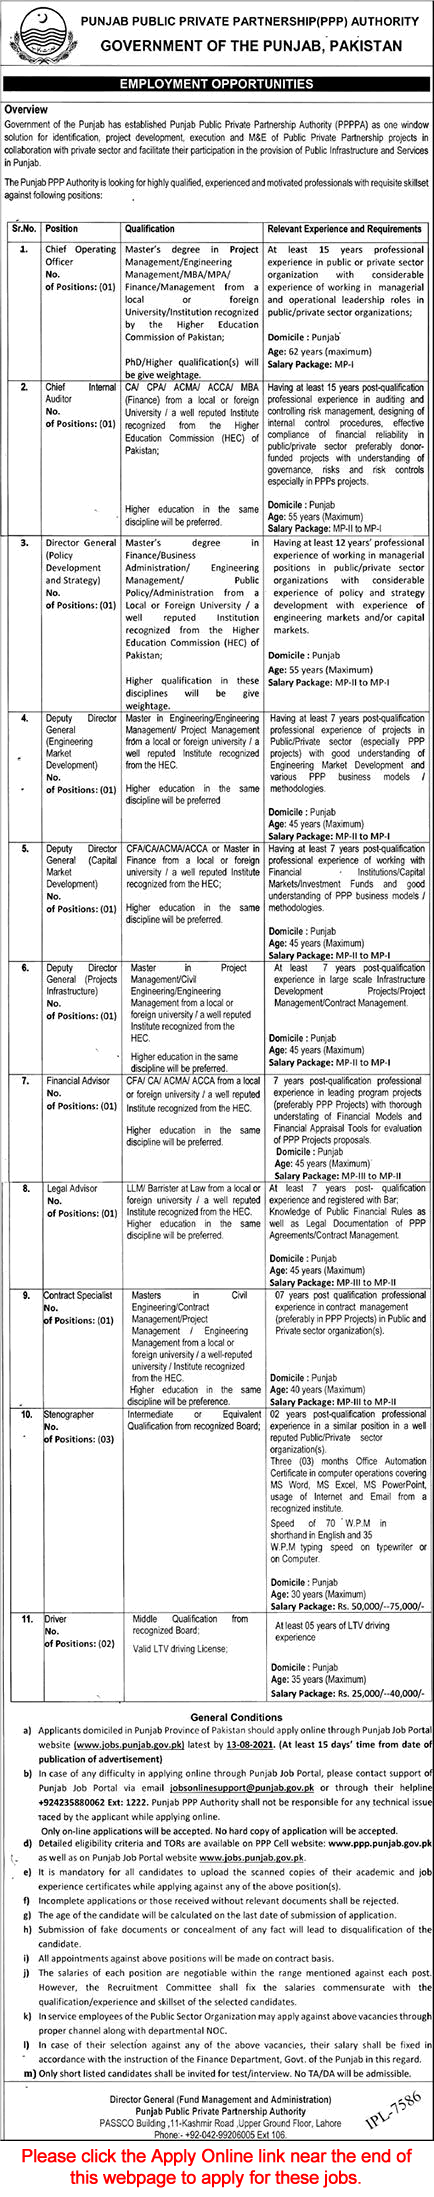 Punjab Public Private Partnership Authority Jobs 2021 July / August Apply Online Deputy Directors & Others Latest